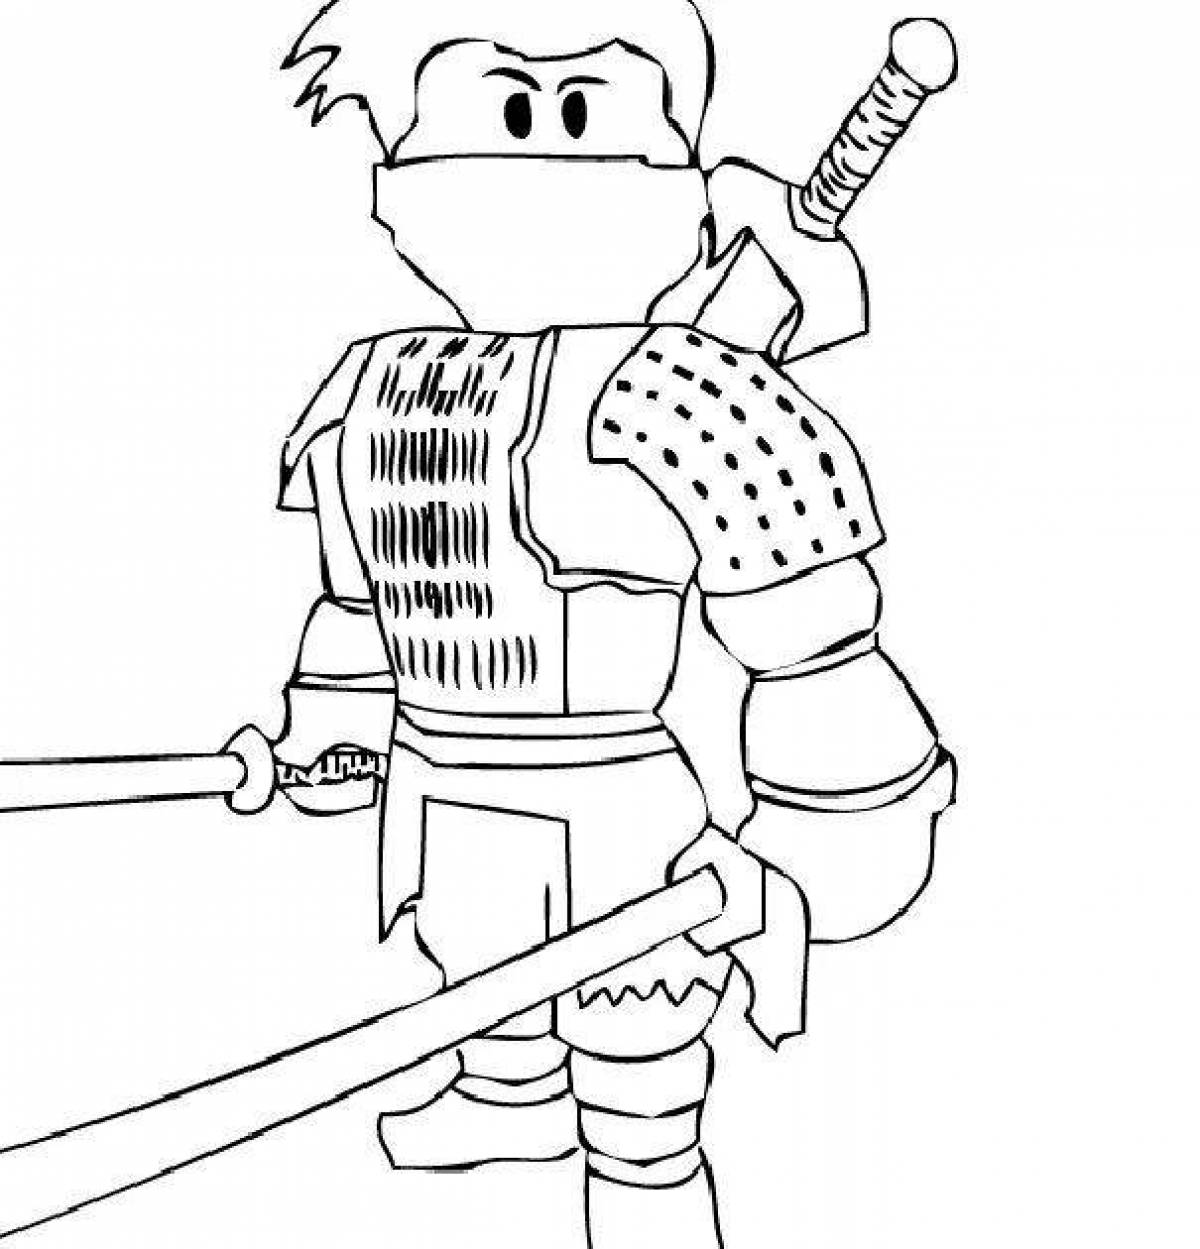 Roblox comic characters coloring page